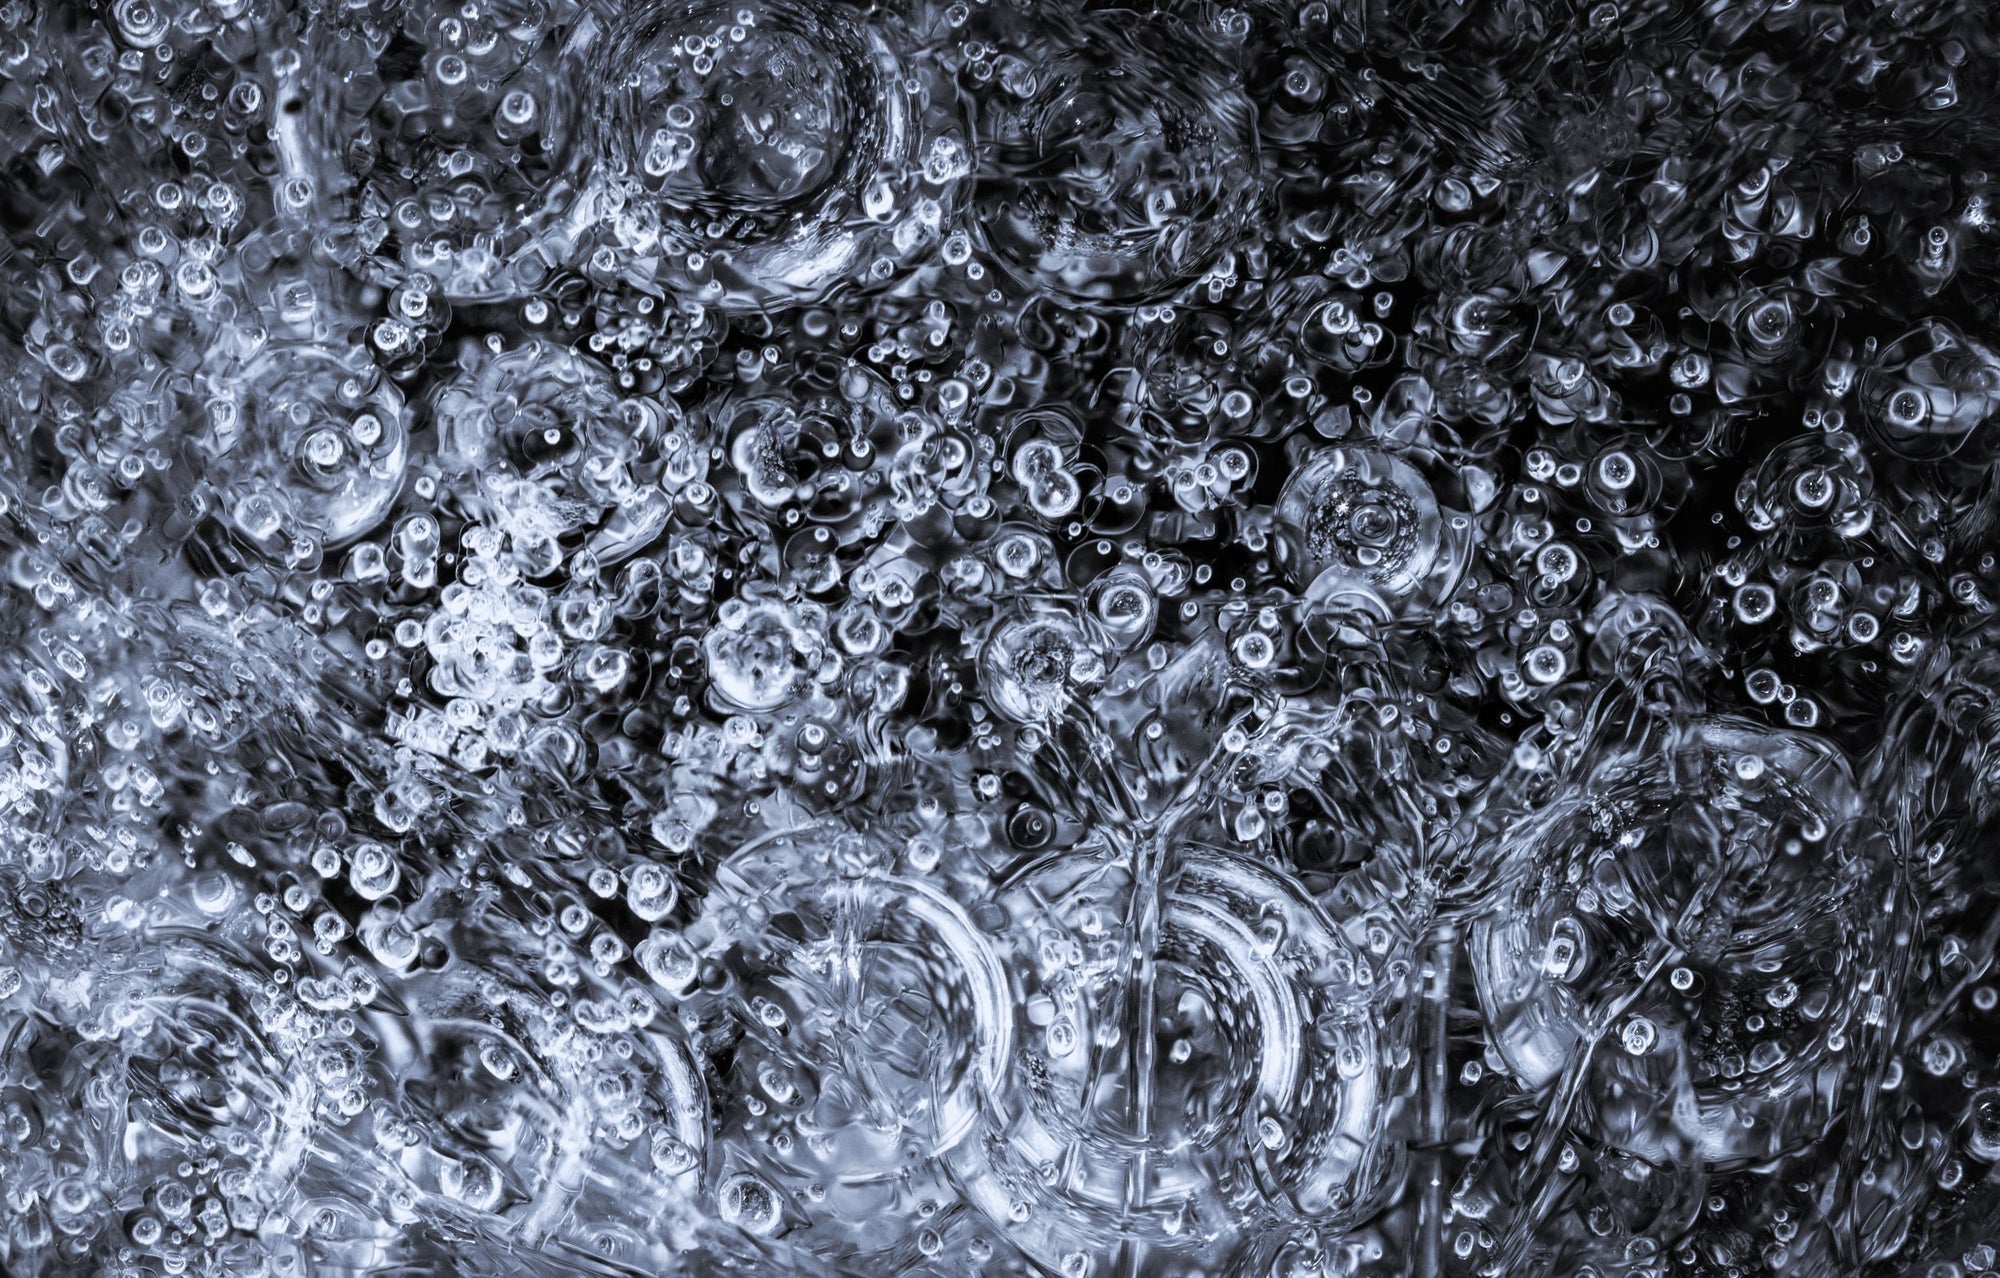 Frozen bubbles of water against a dark background.